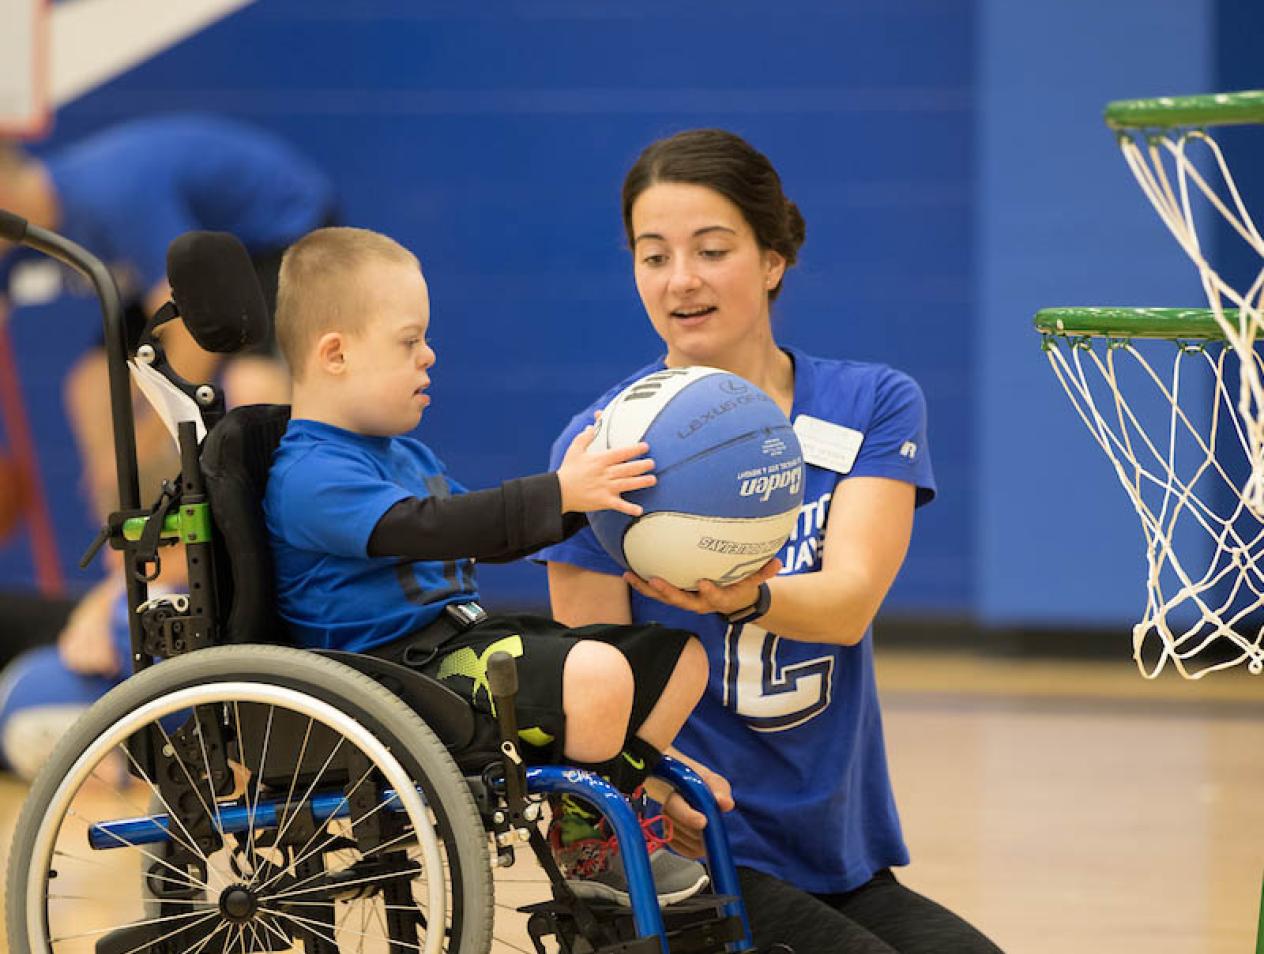 Instructor helping disabled child with basketball.